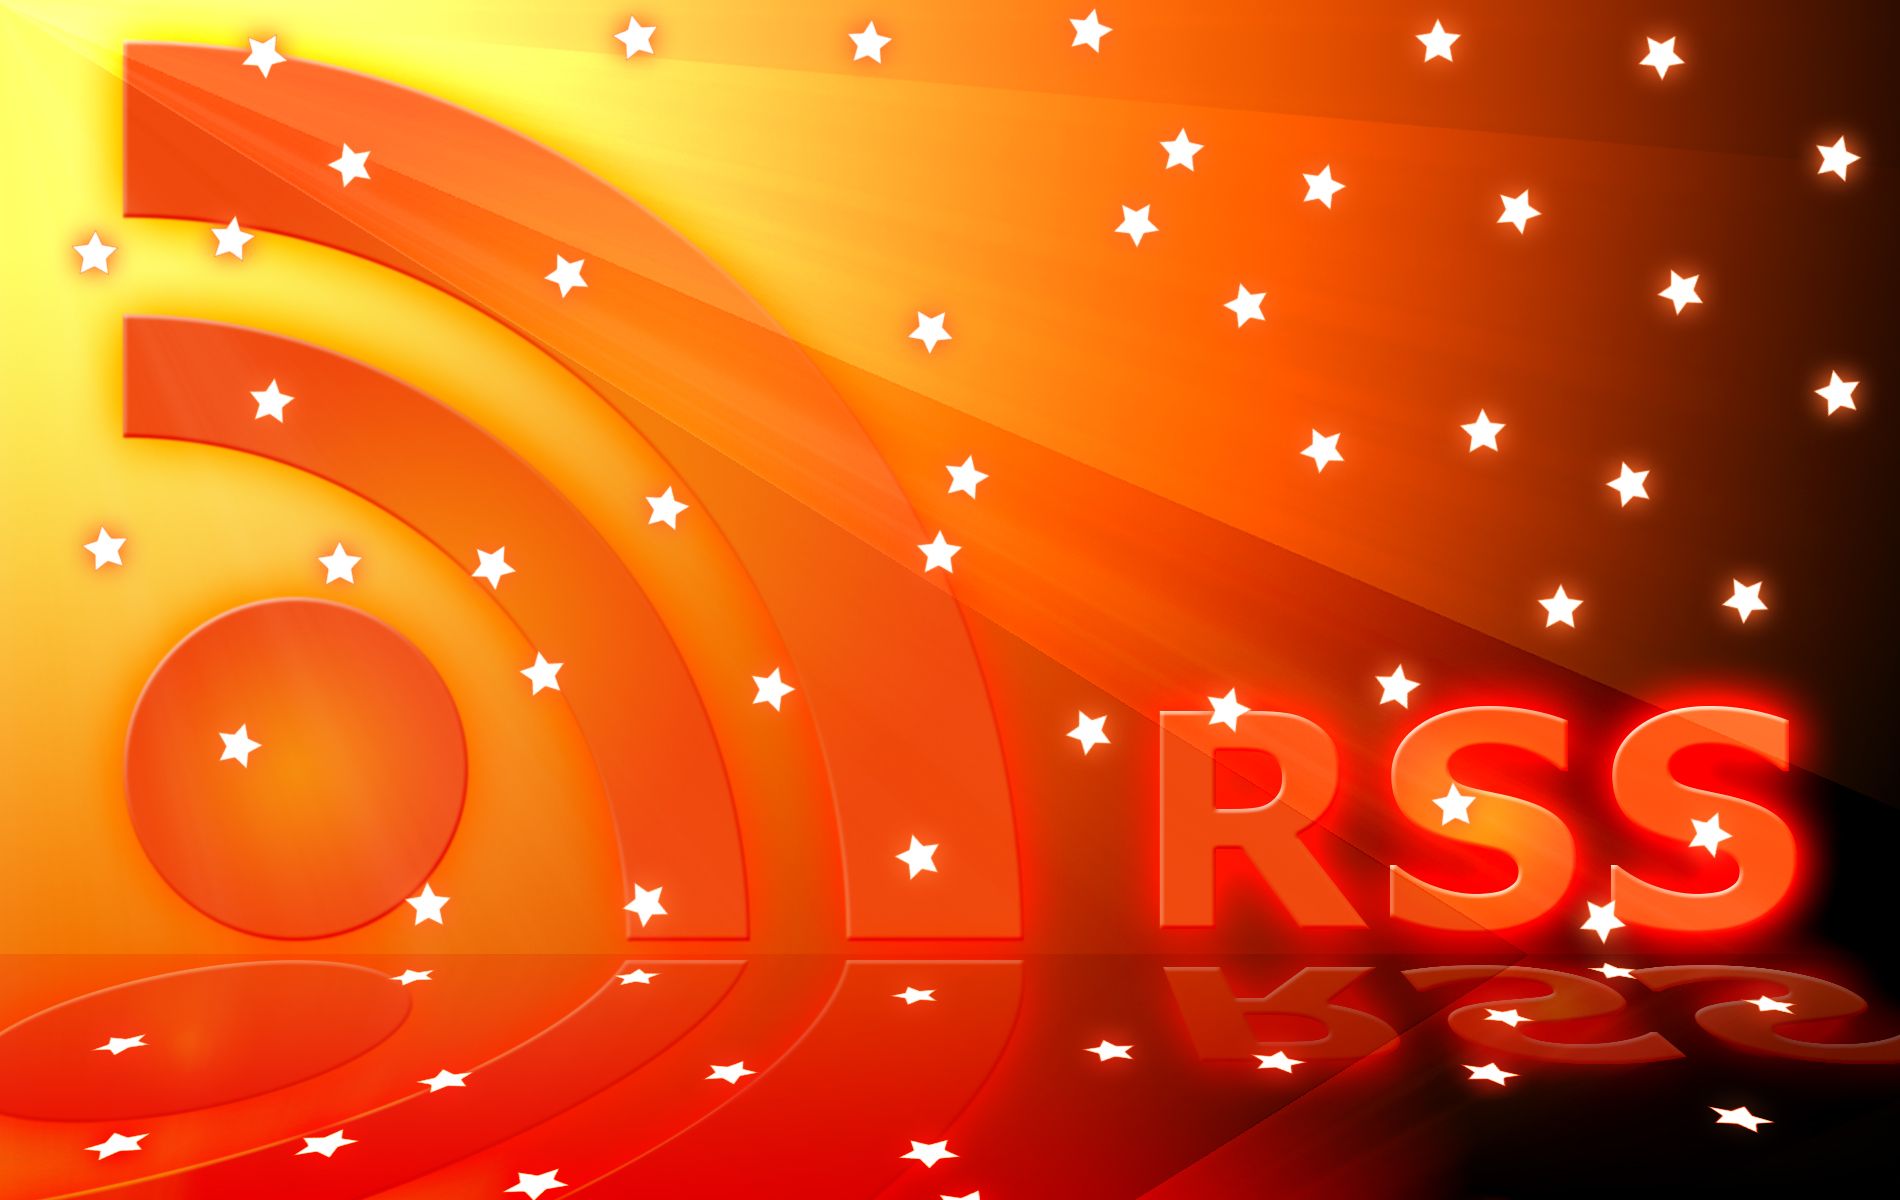 RSS Flag Wallpapers - Wallpaper Cave